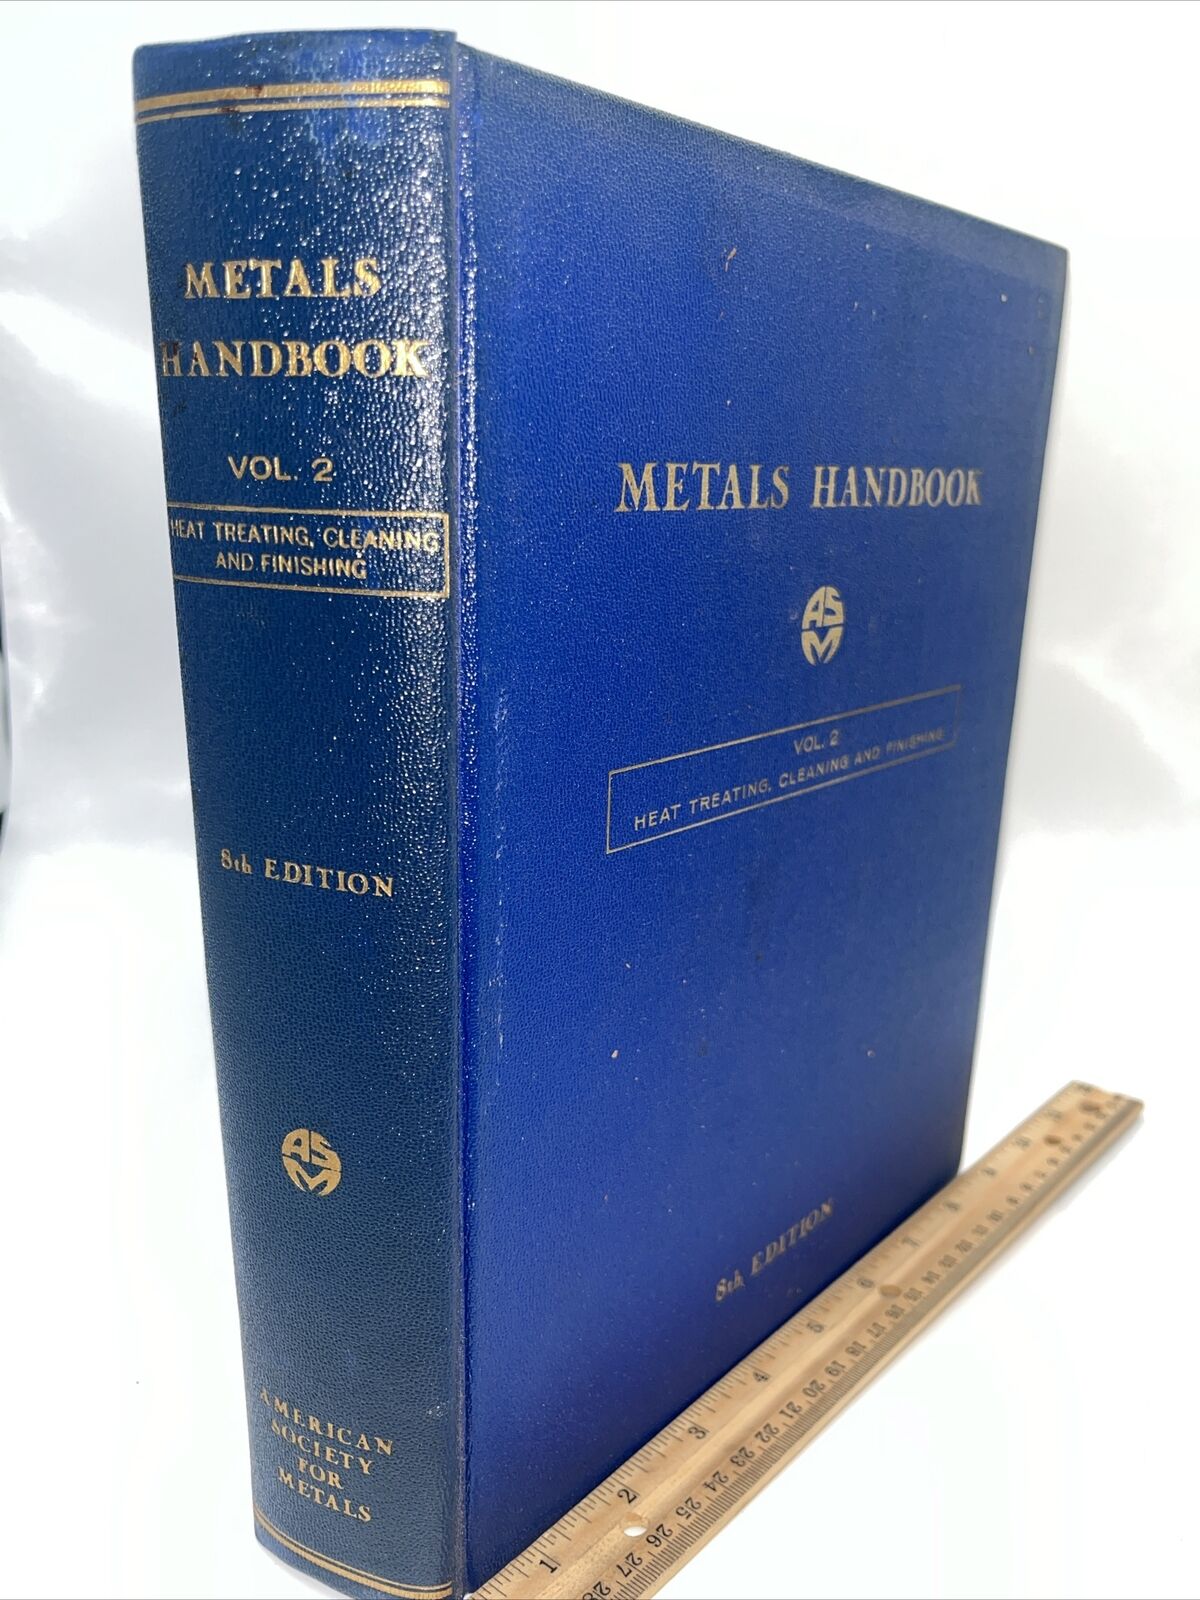 ASM Metals Handbook Vol 2 Heat Treating Cleaning and Finishing 8th Ed HC 1967